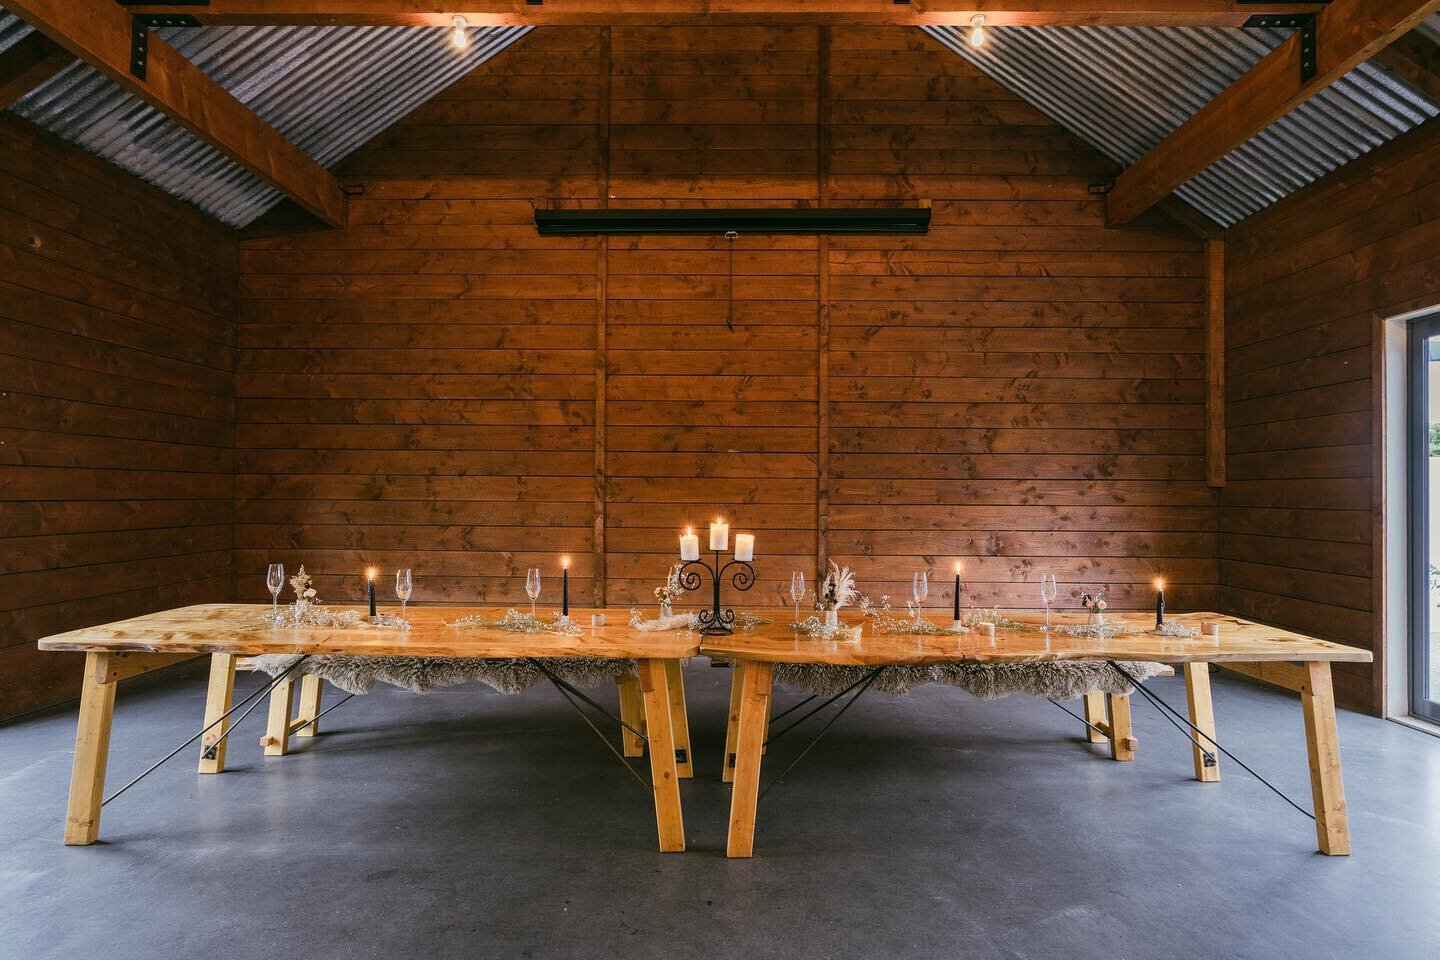 Oh, how we love the rustic wing.

The options are endless to set up for your big day🎉

#wanakaweddings #wanakaevents #weddingvenue